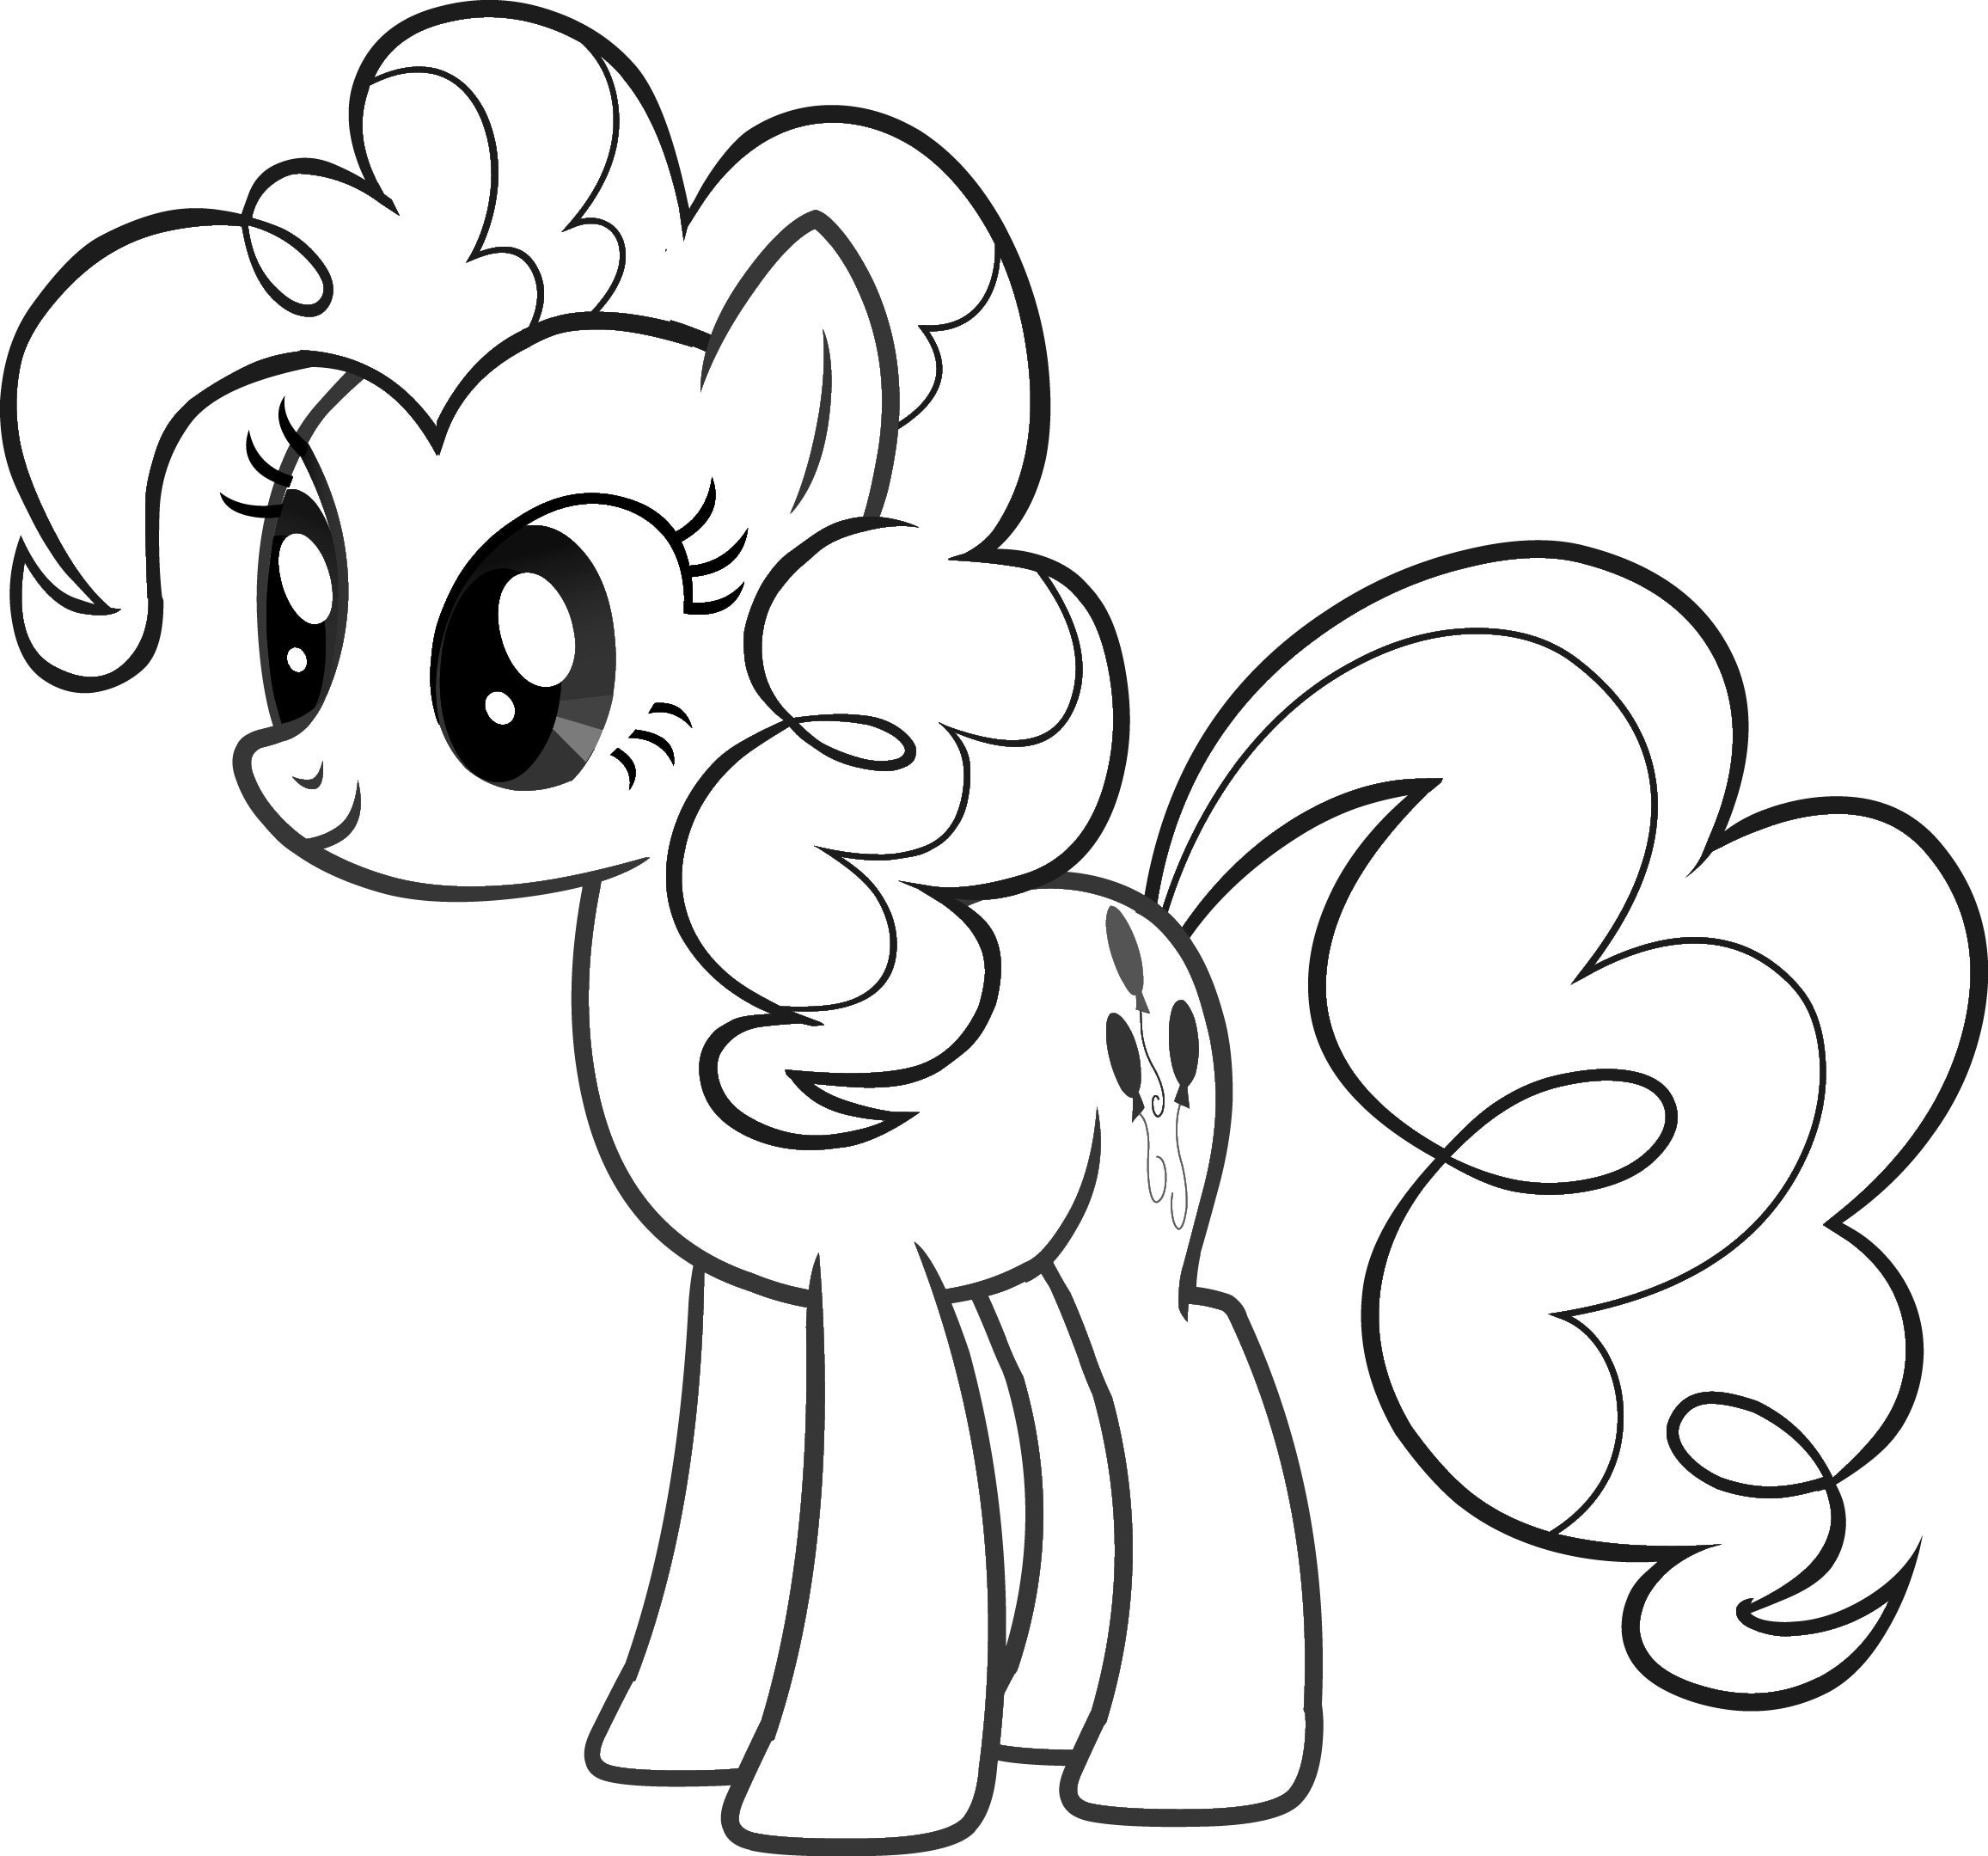 Coloring Pages For Little Girls
 My little pony coloring pages